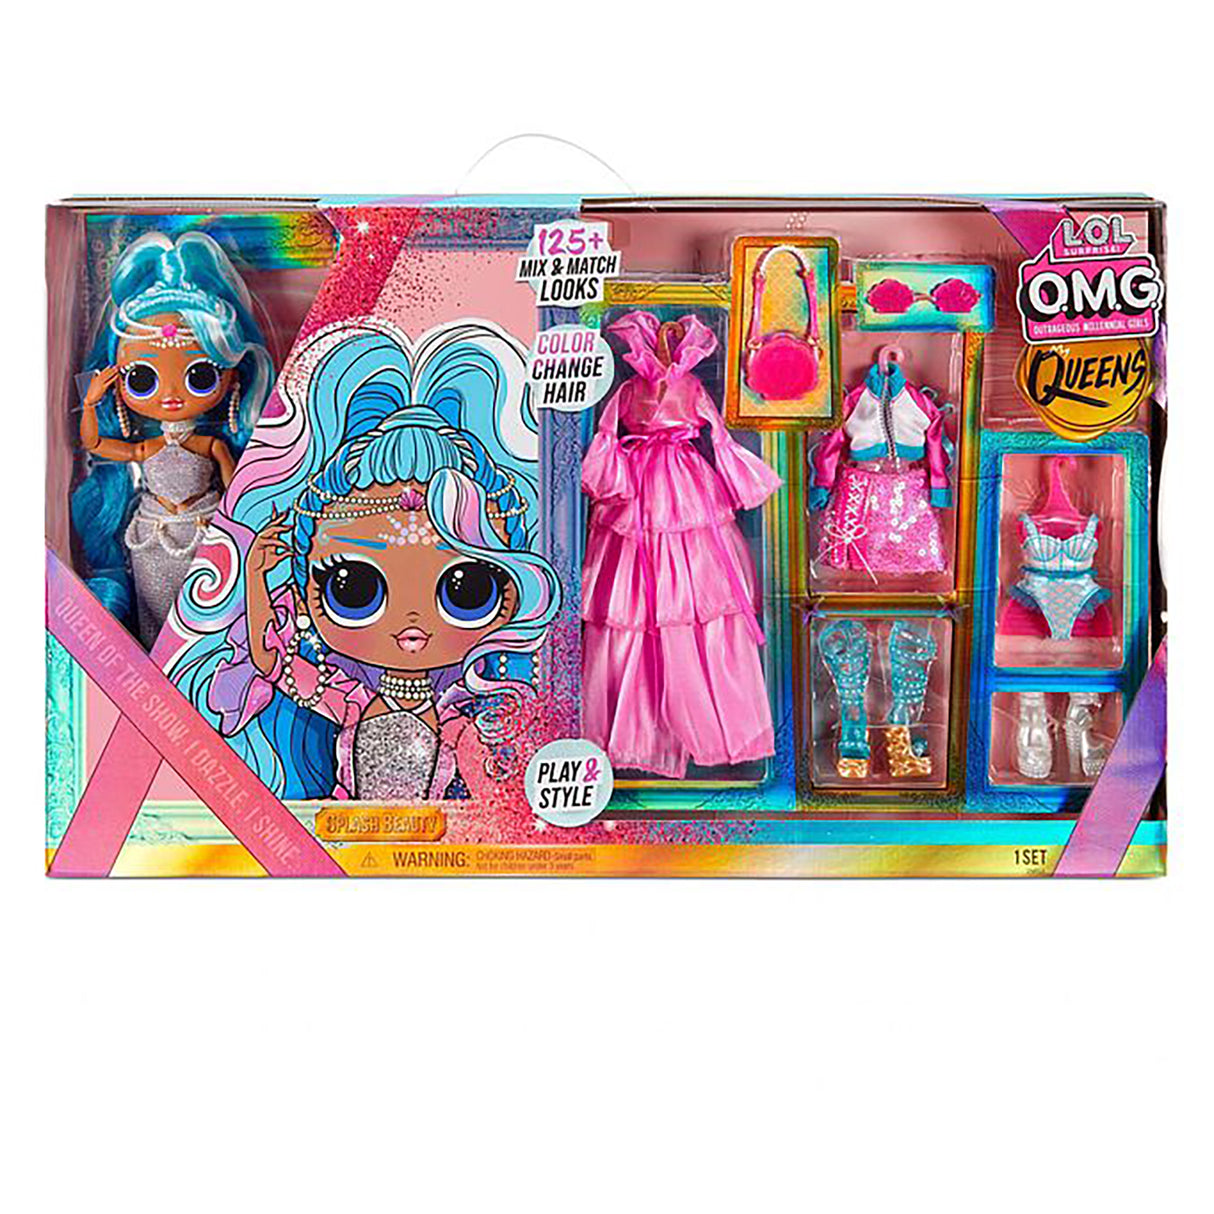 L.O.L. Surprise! O.M.G. Queens Splash Beauty Fashion Doll with 125 Mix and Match Fashion Looks